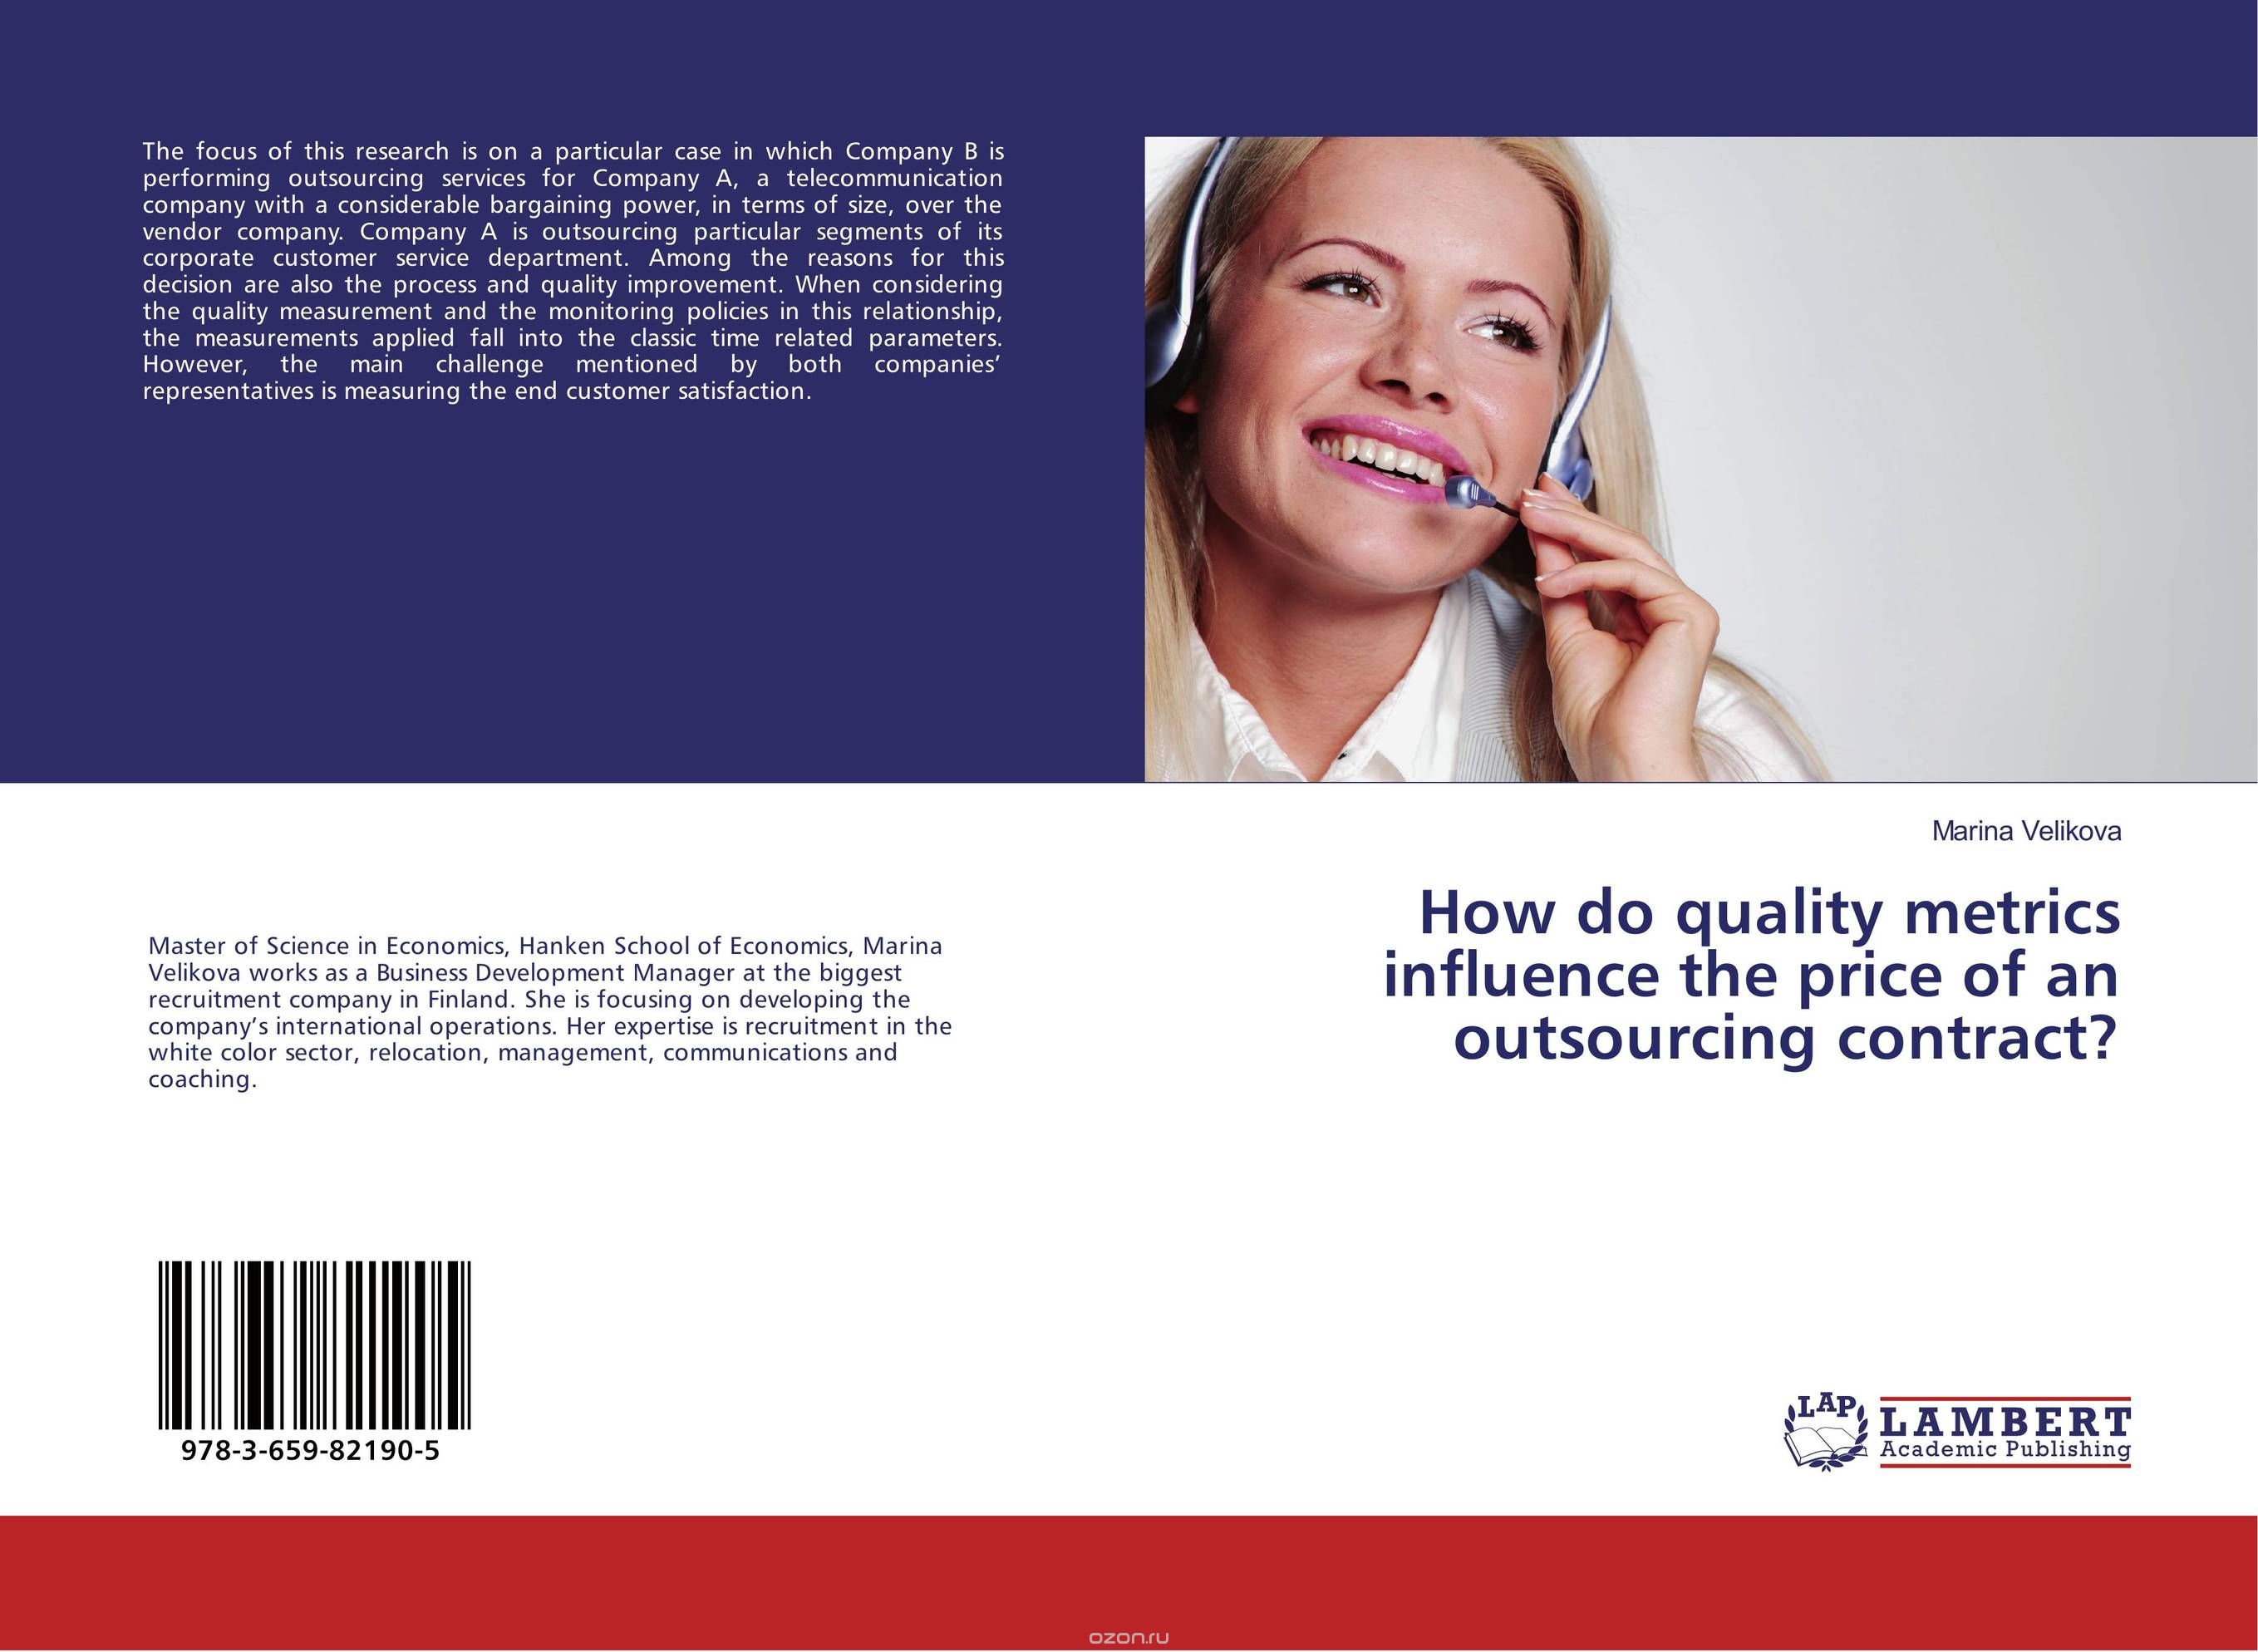 Скачать книгу "How do quality metrics influence the price of an outsourcing contract?"